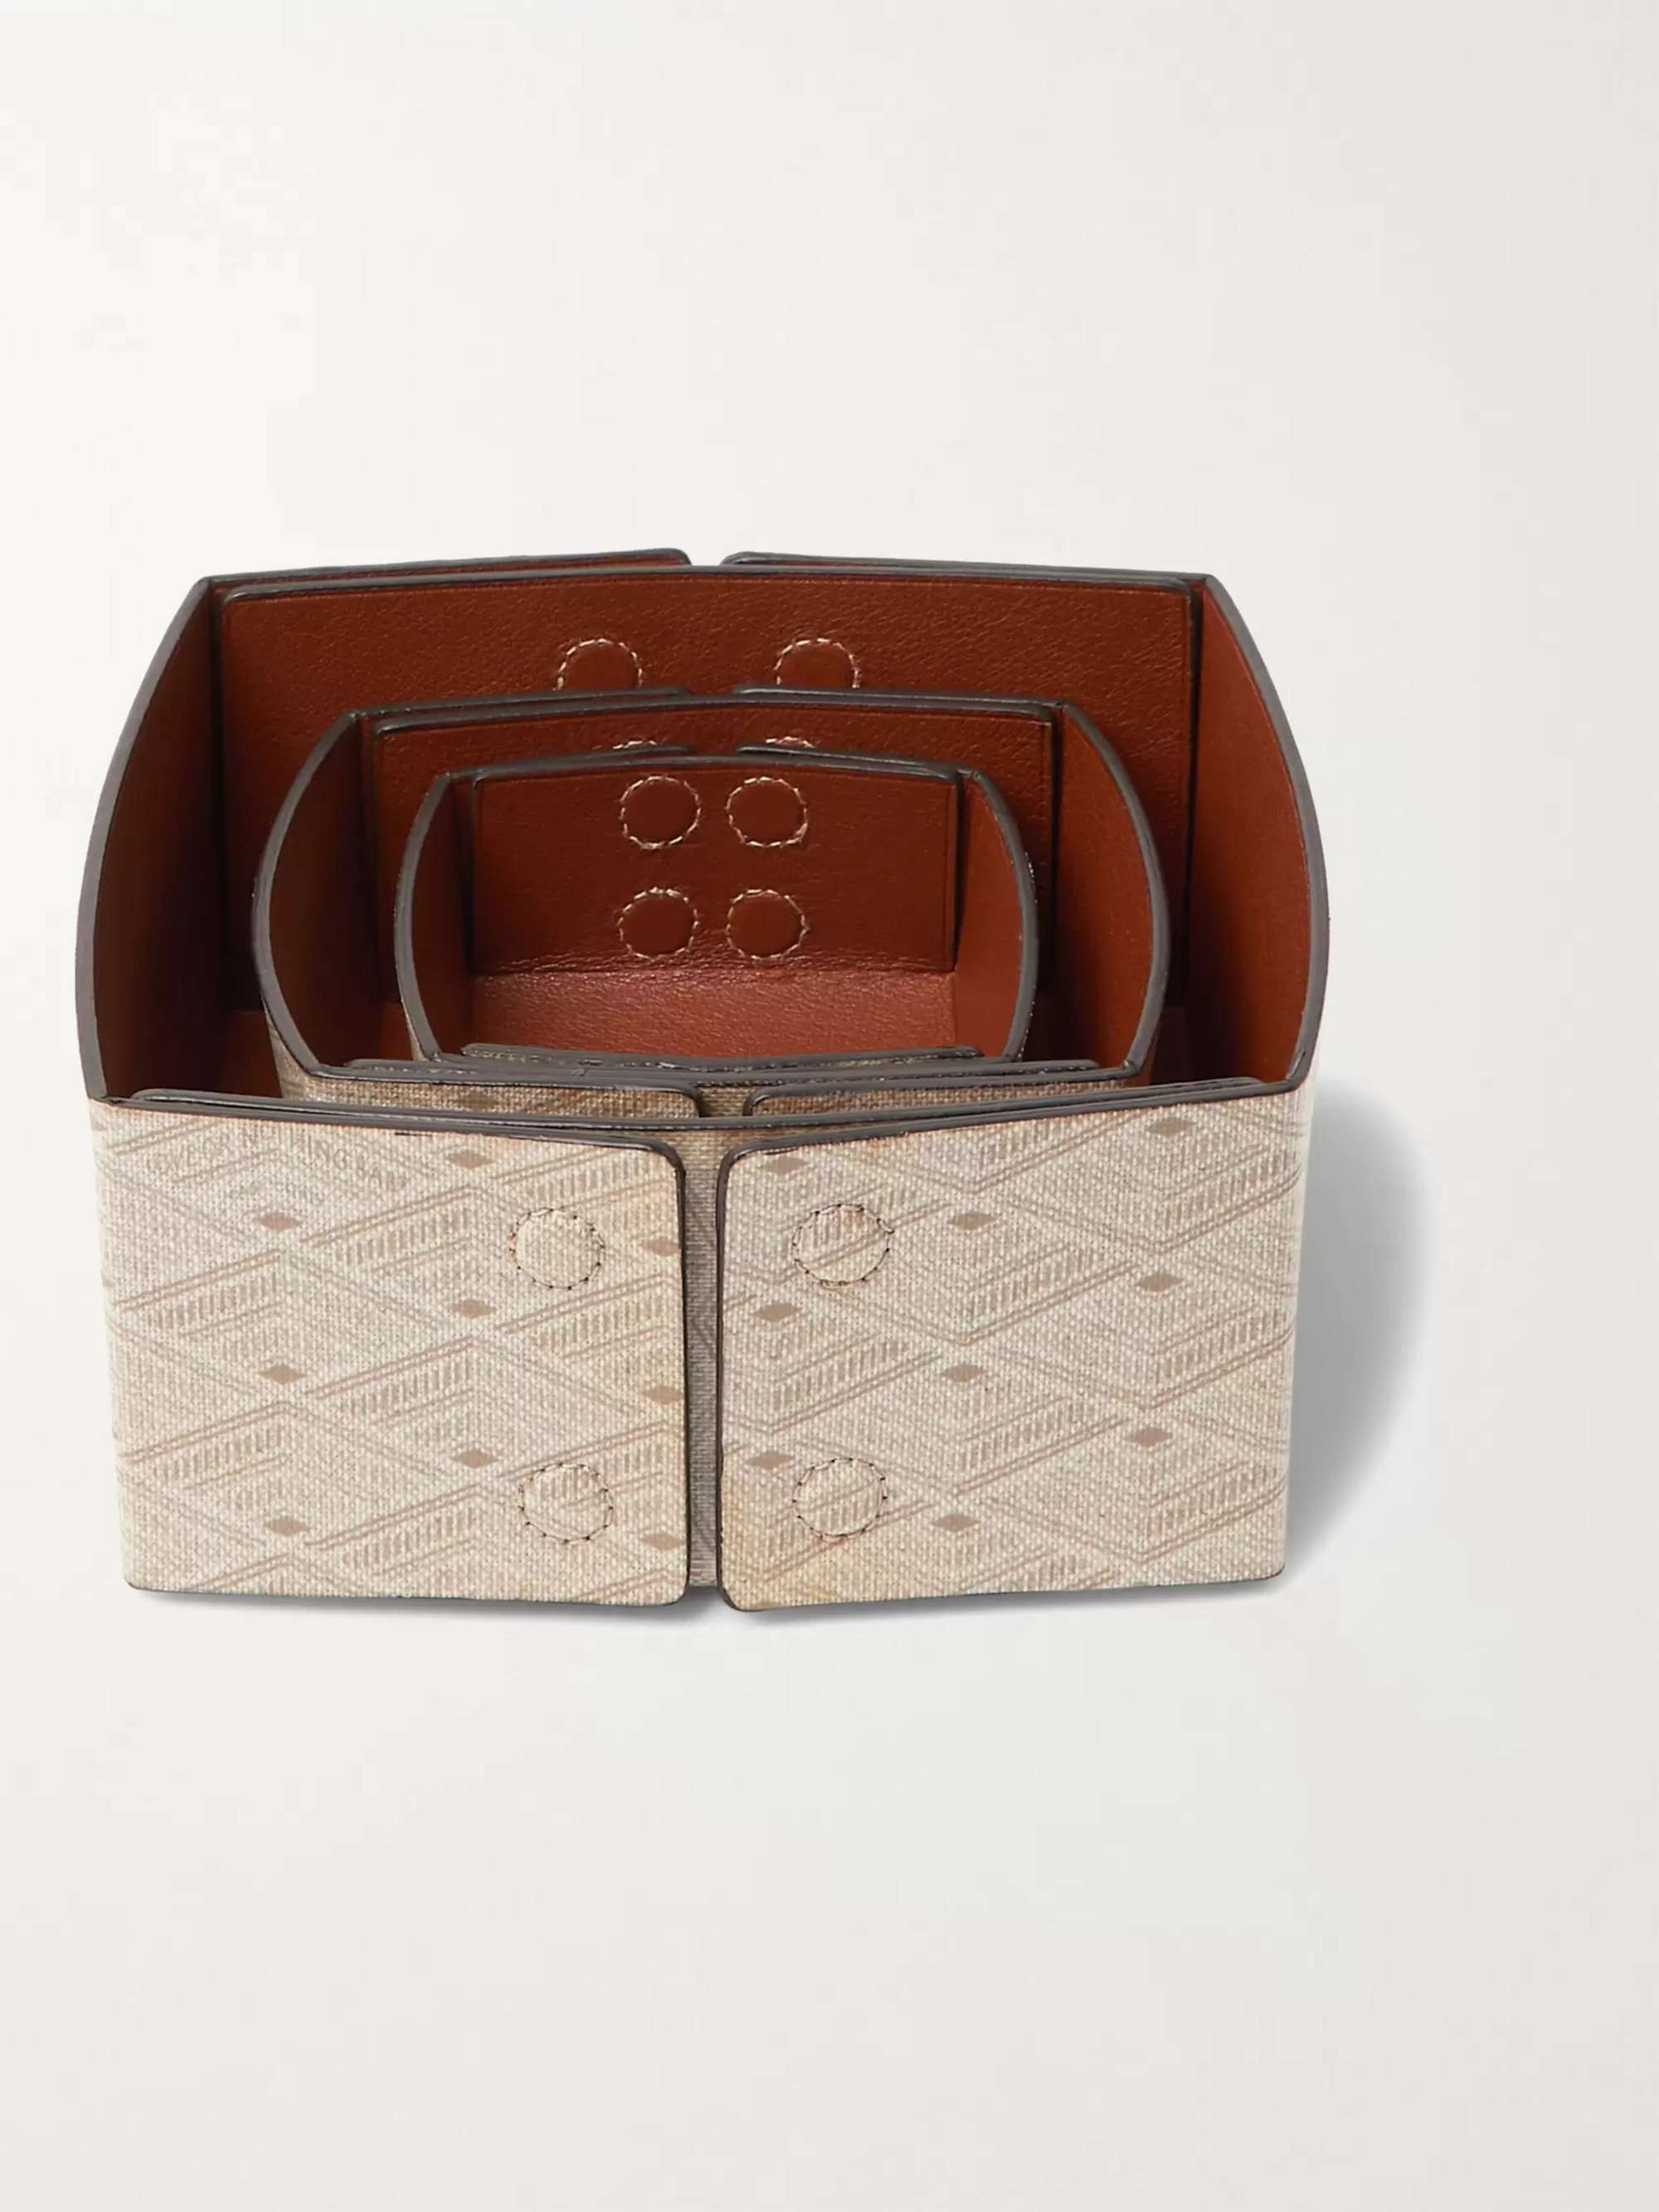 MÉTIER Set of Three Reversible Collapsible Printed Canvas and Leather Boxes